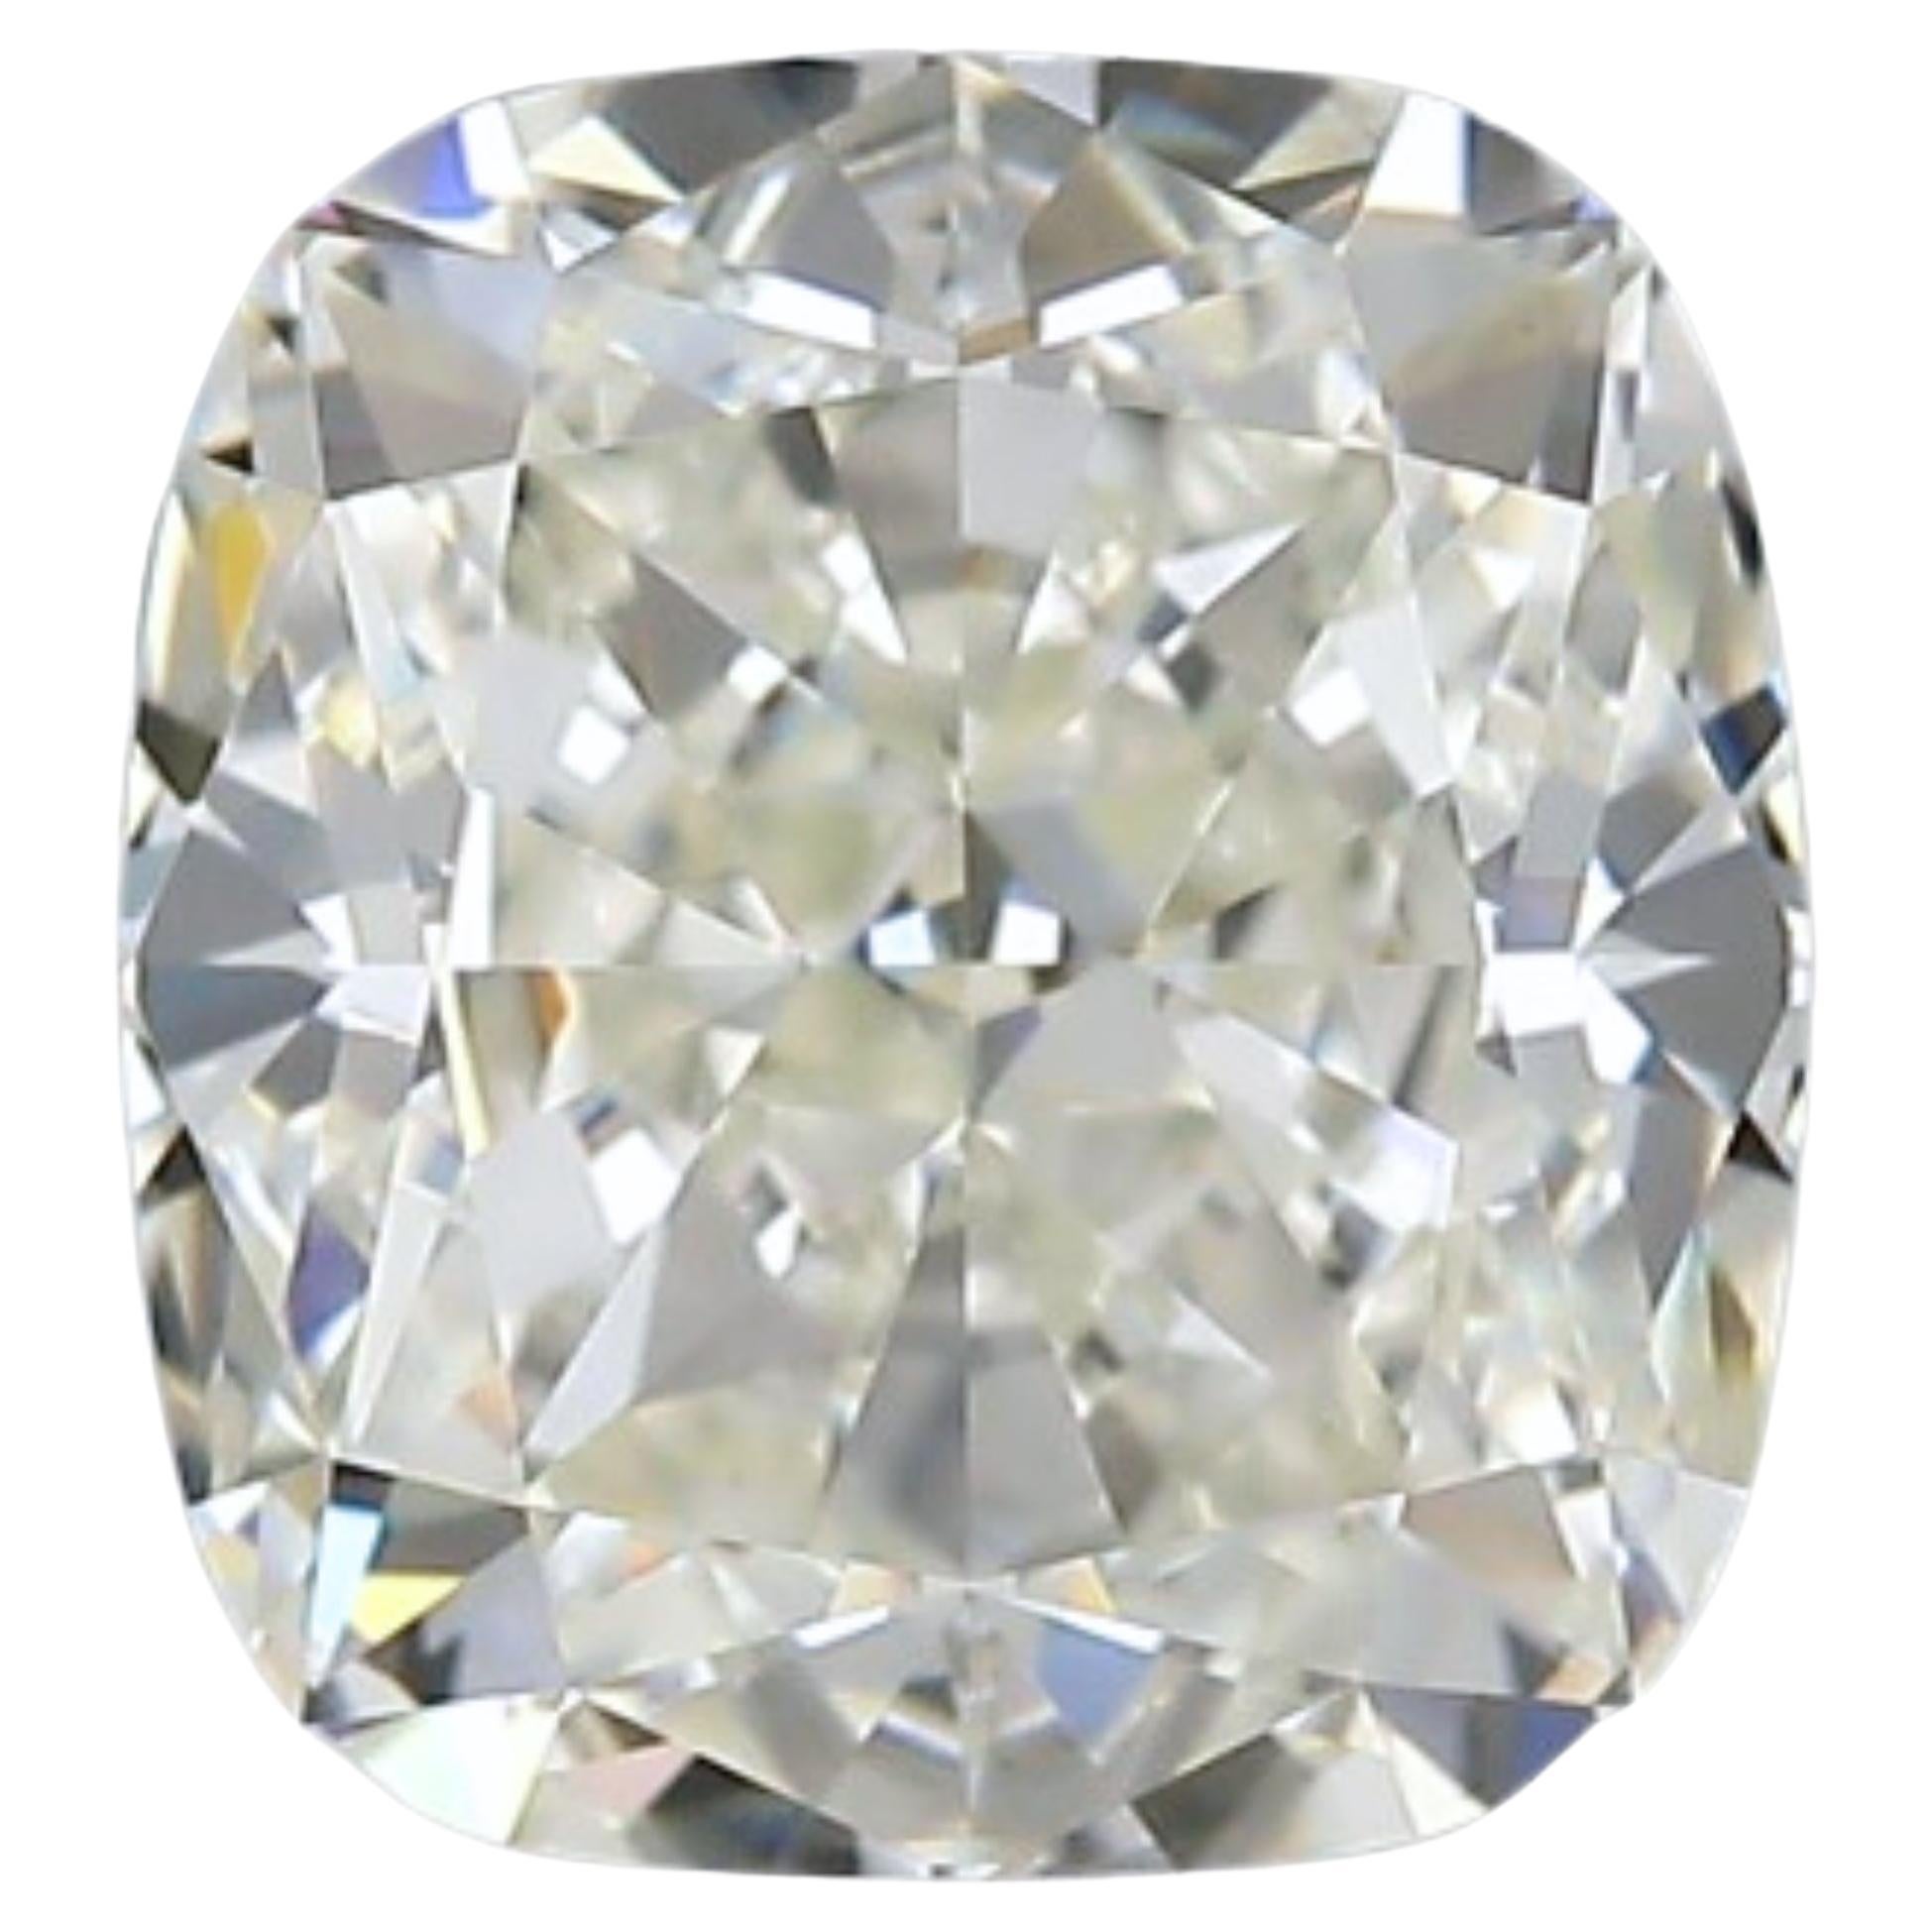 1pc Stunning Natural cut Cushion diamond in a 1.51 carat For Sale